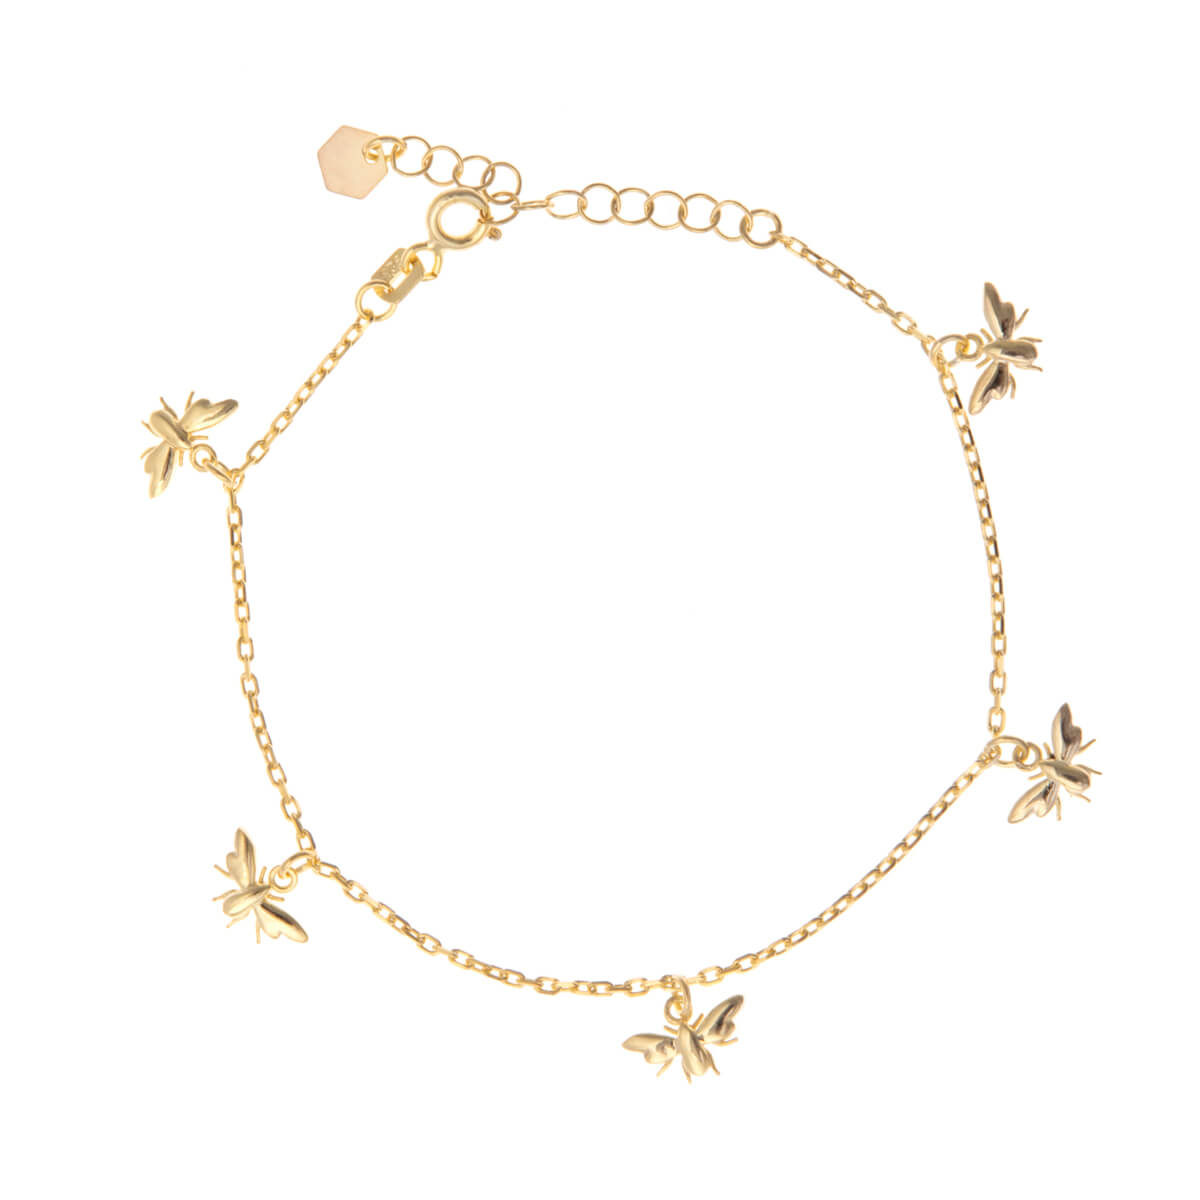 Bees Gold Plated Charm Bracelet